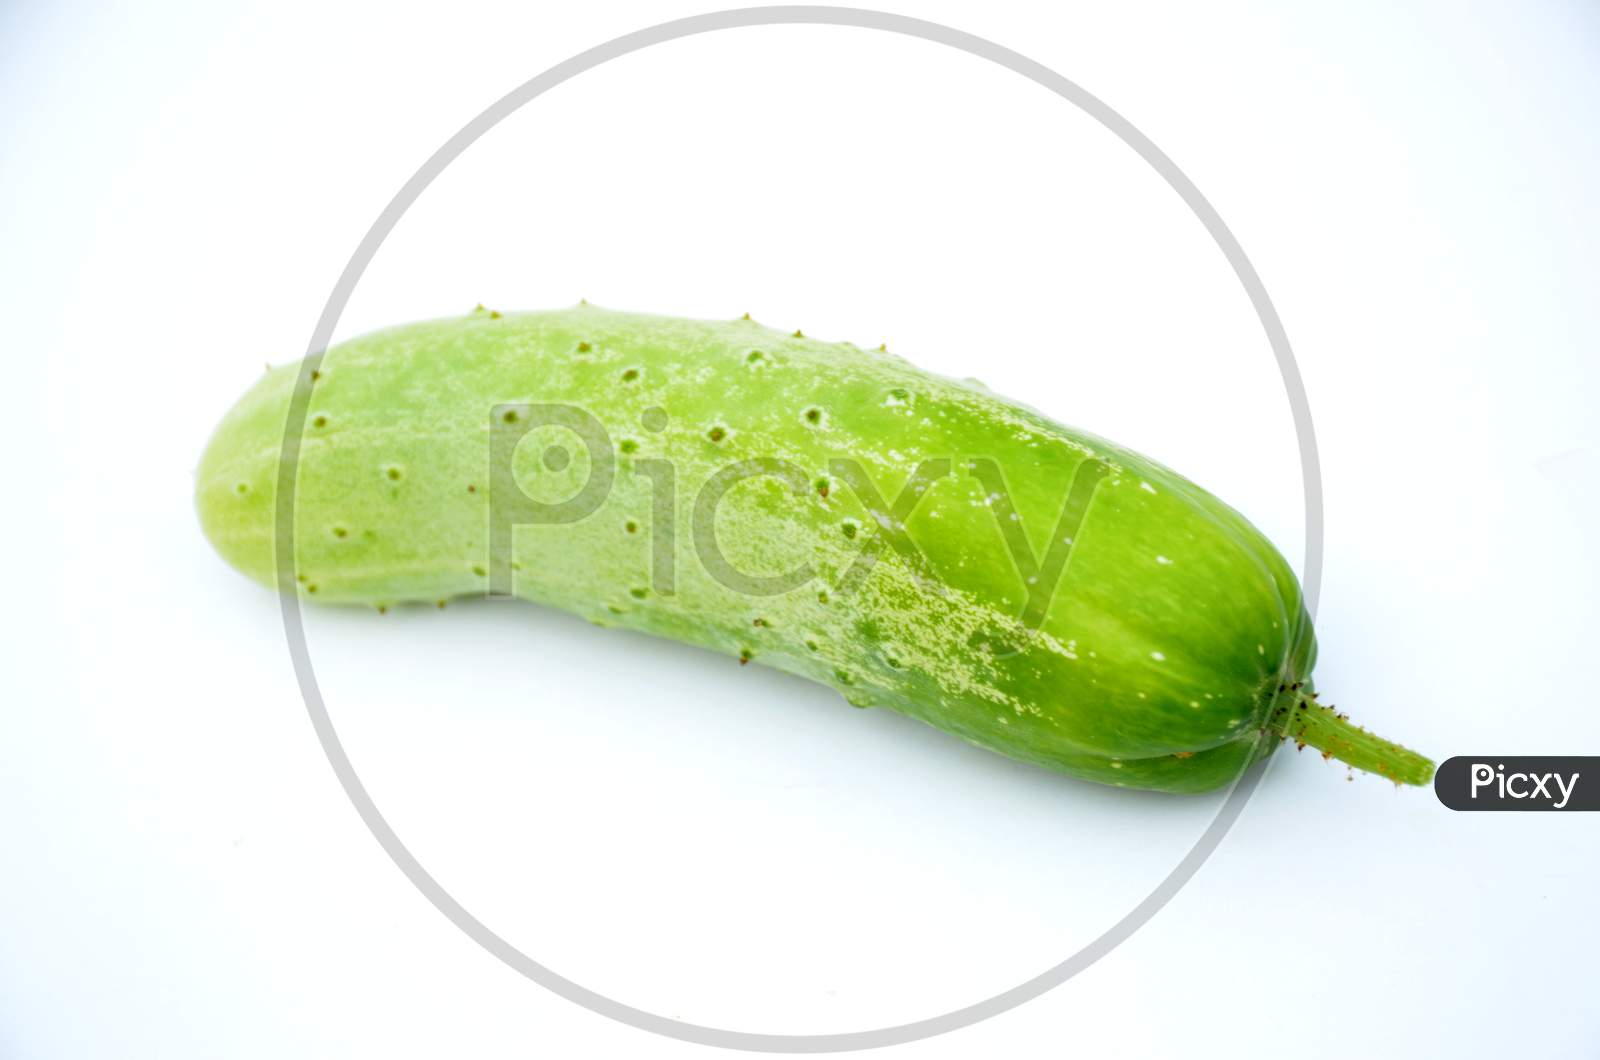 ripe green cucumber isolated on white background